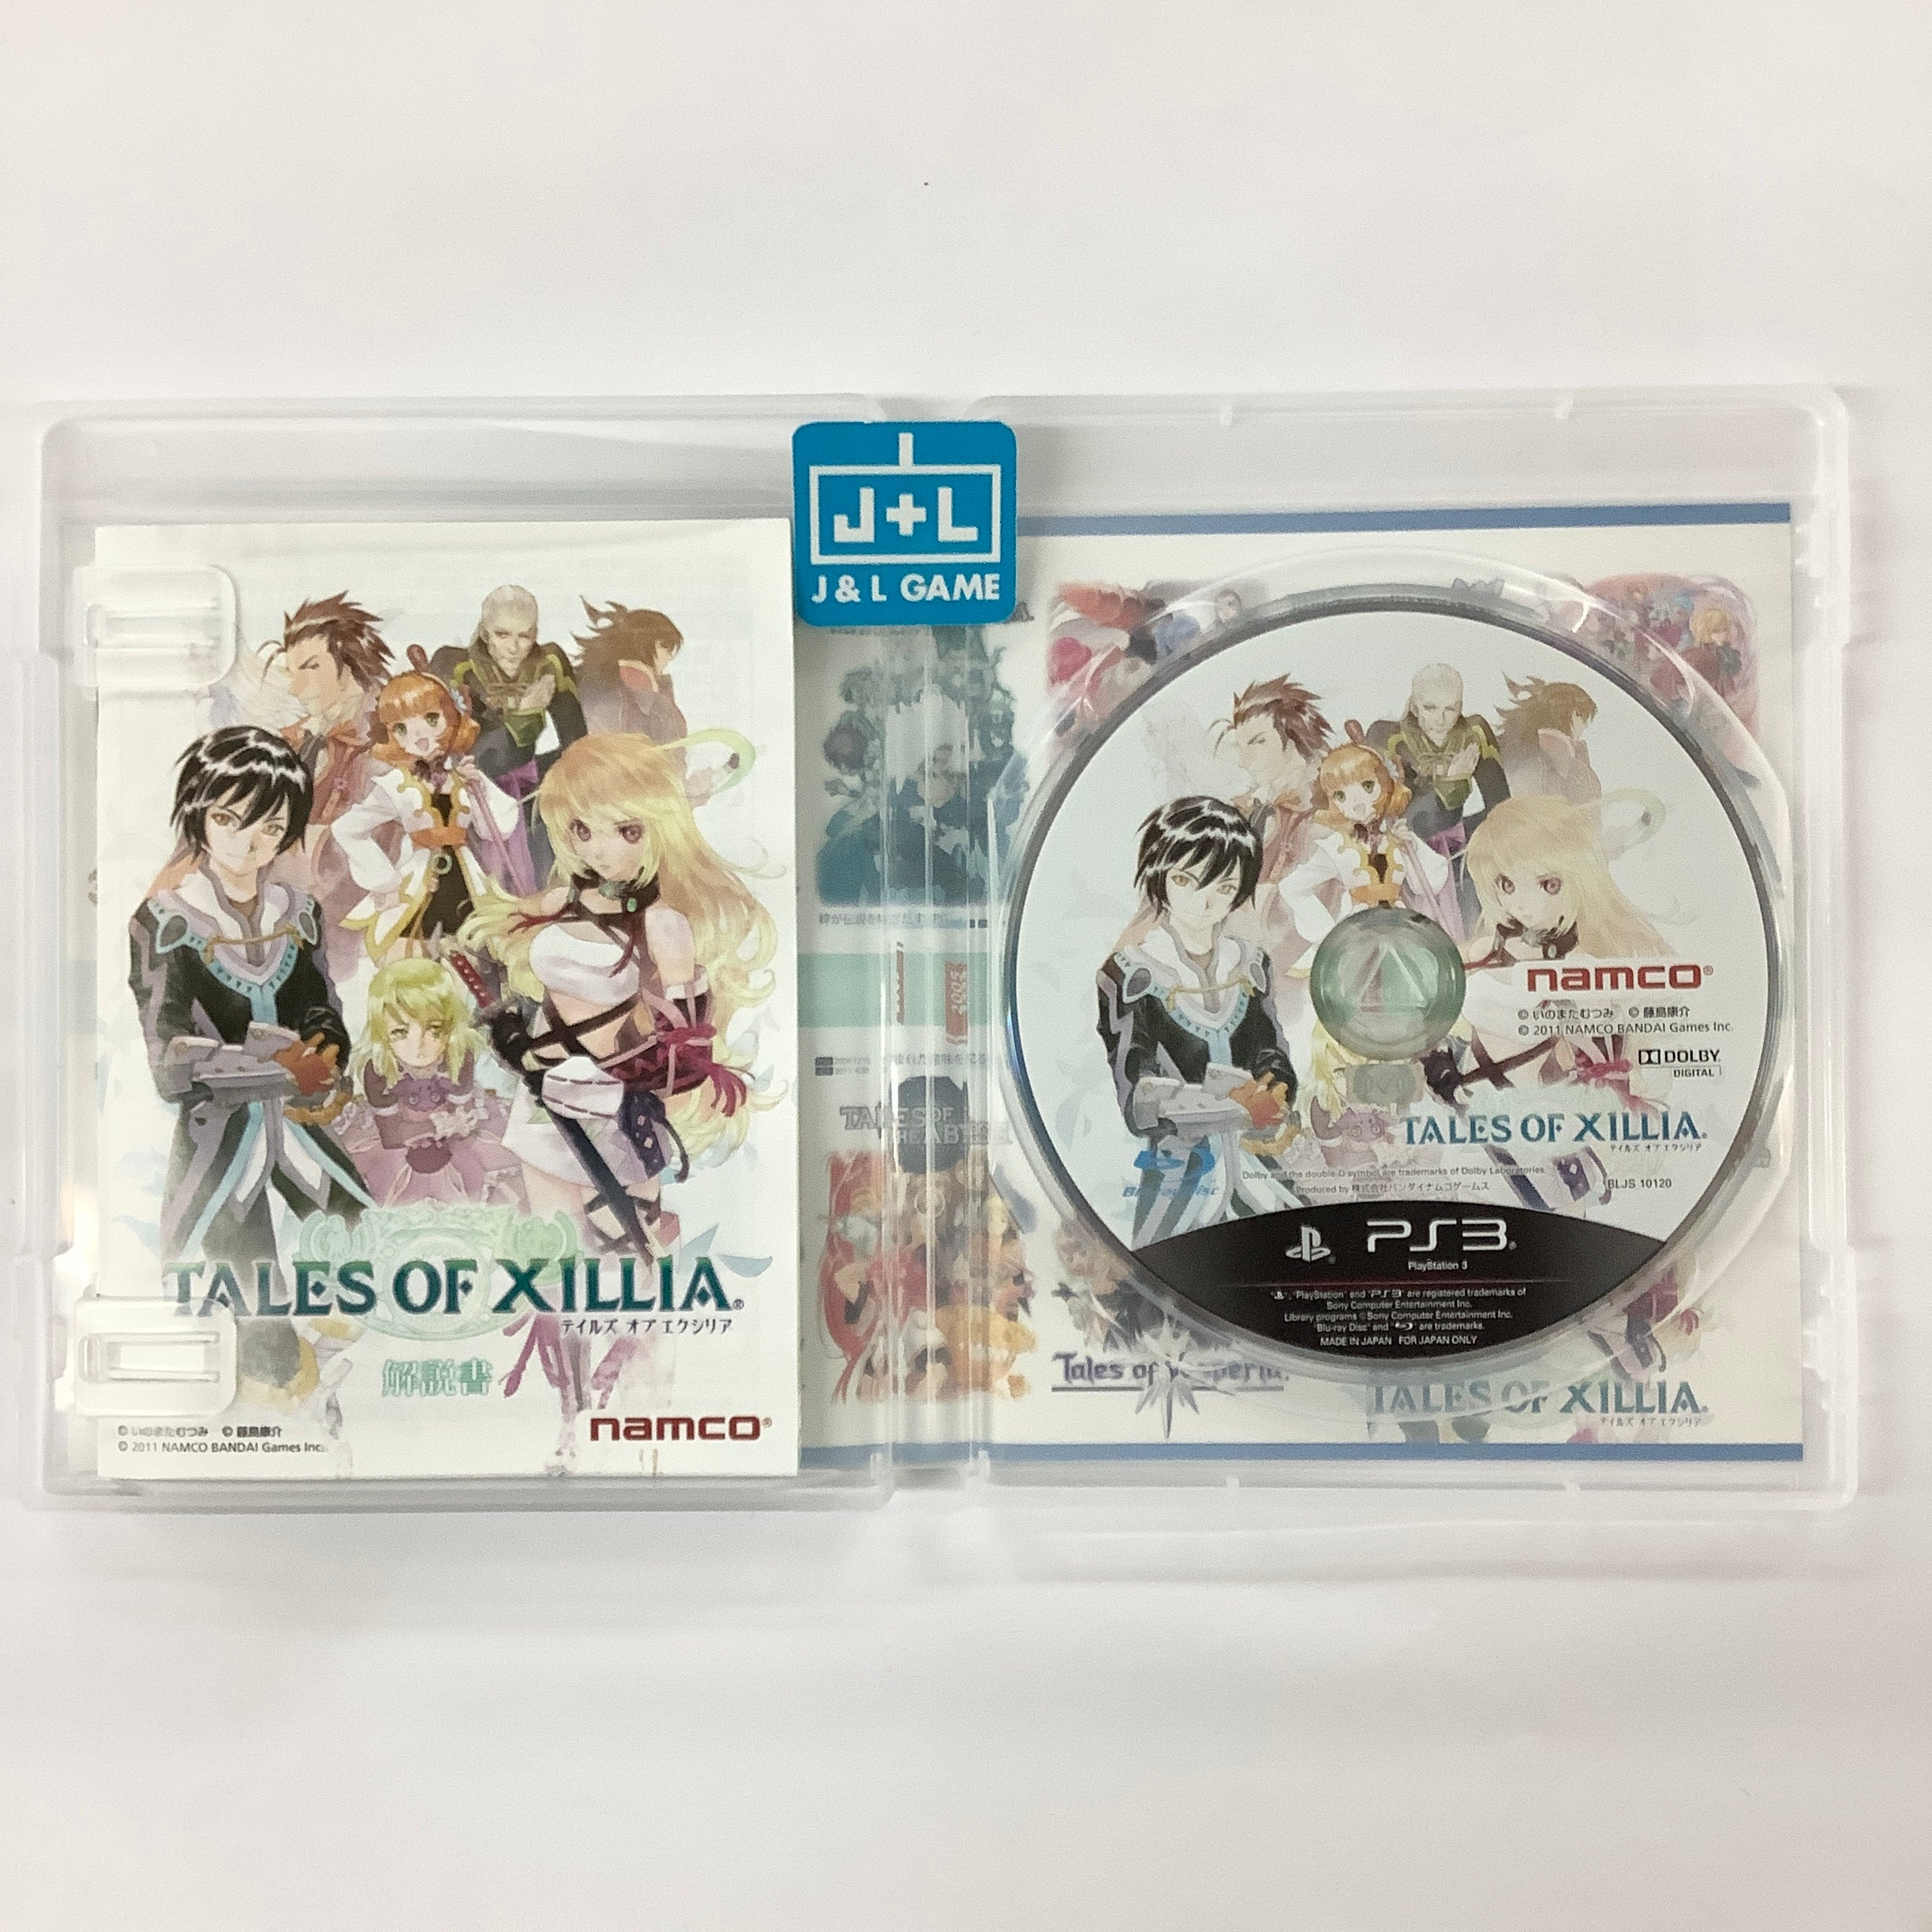 Tales of Xillia - (PS3) PlayStation 3 [Pre-Owned] (Japanese Import) Video Games Bandai Namco Games   